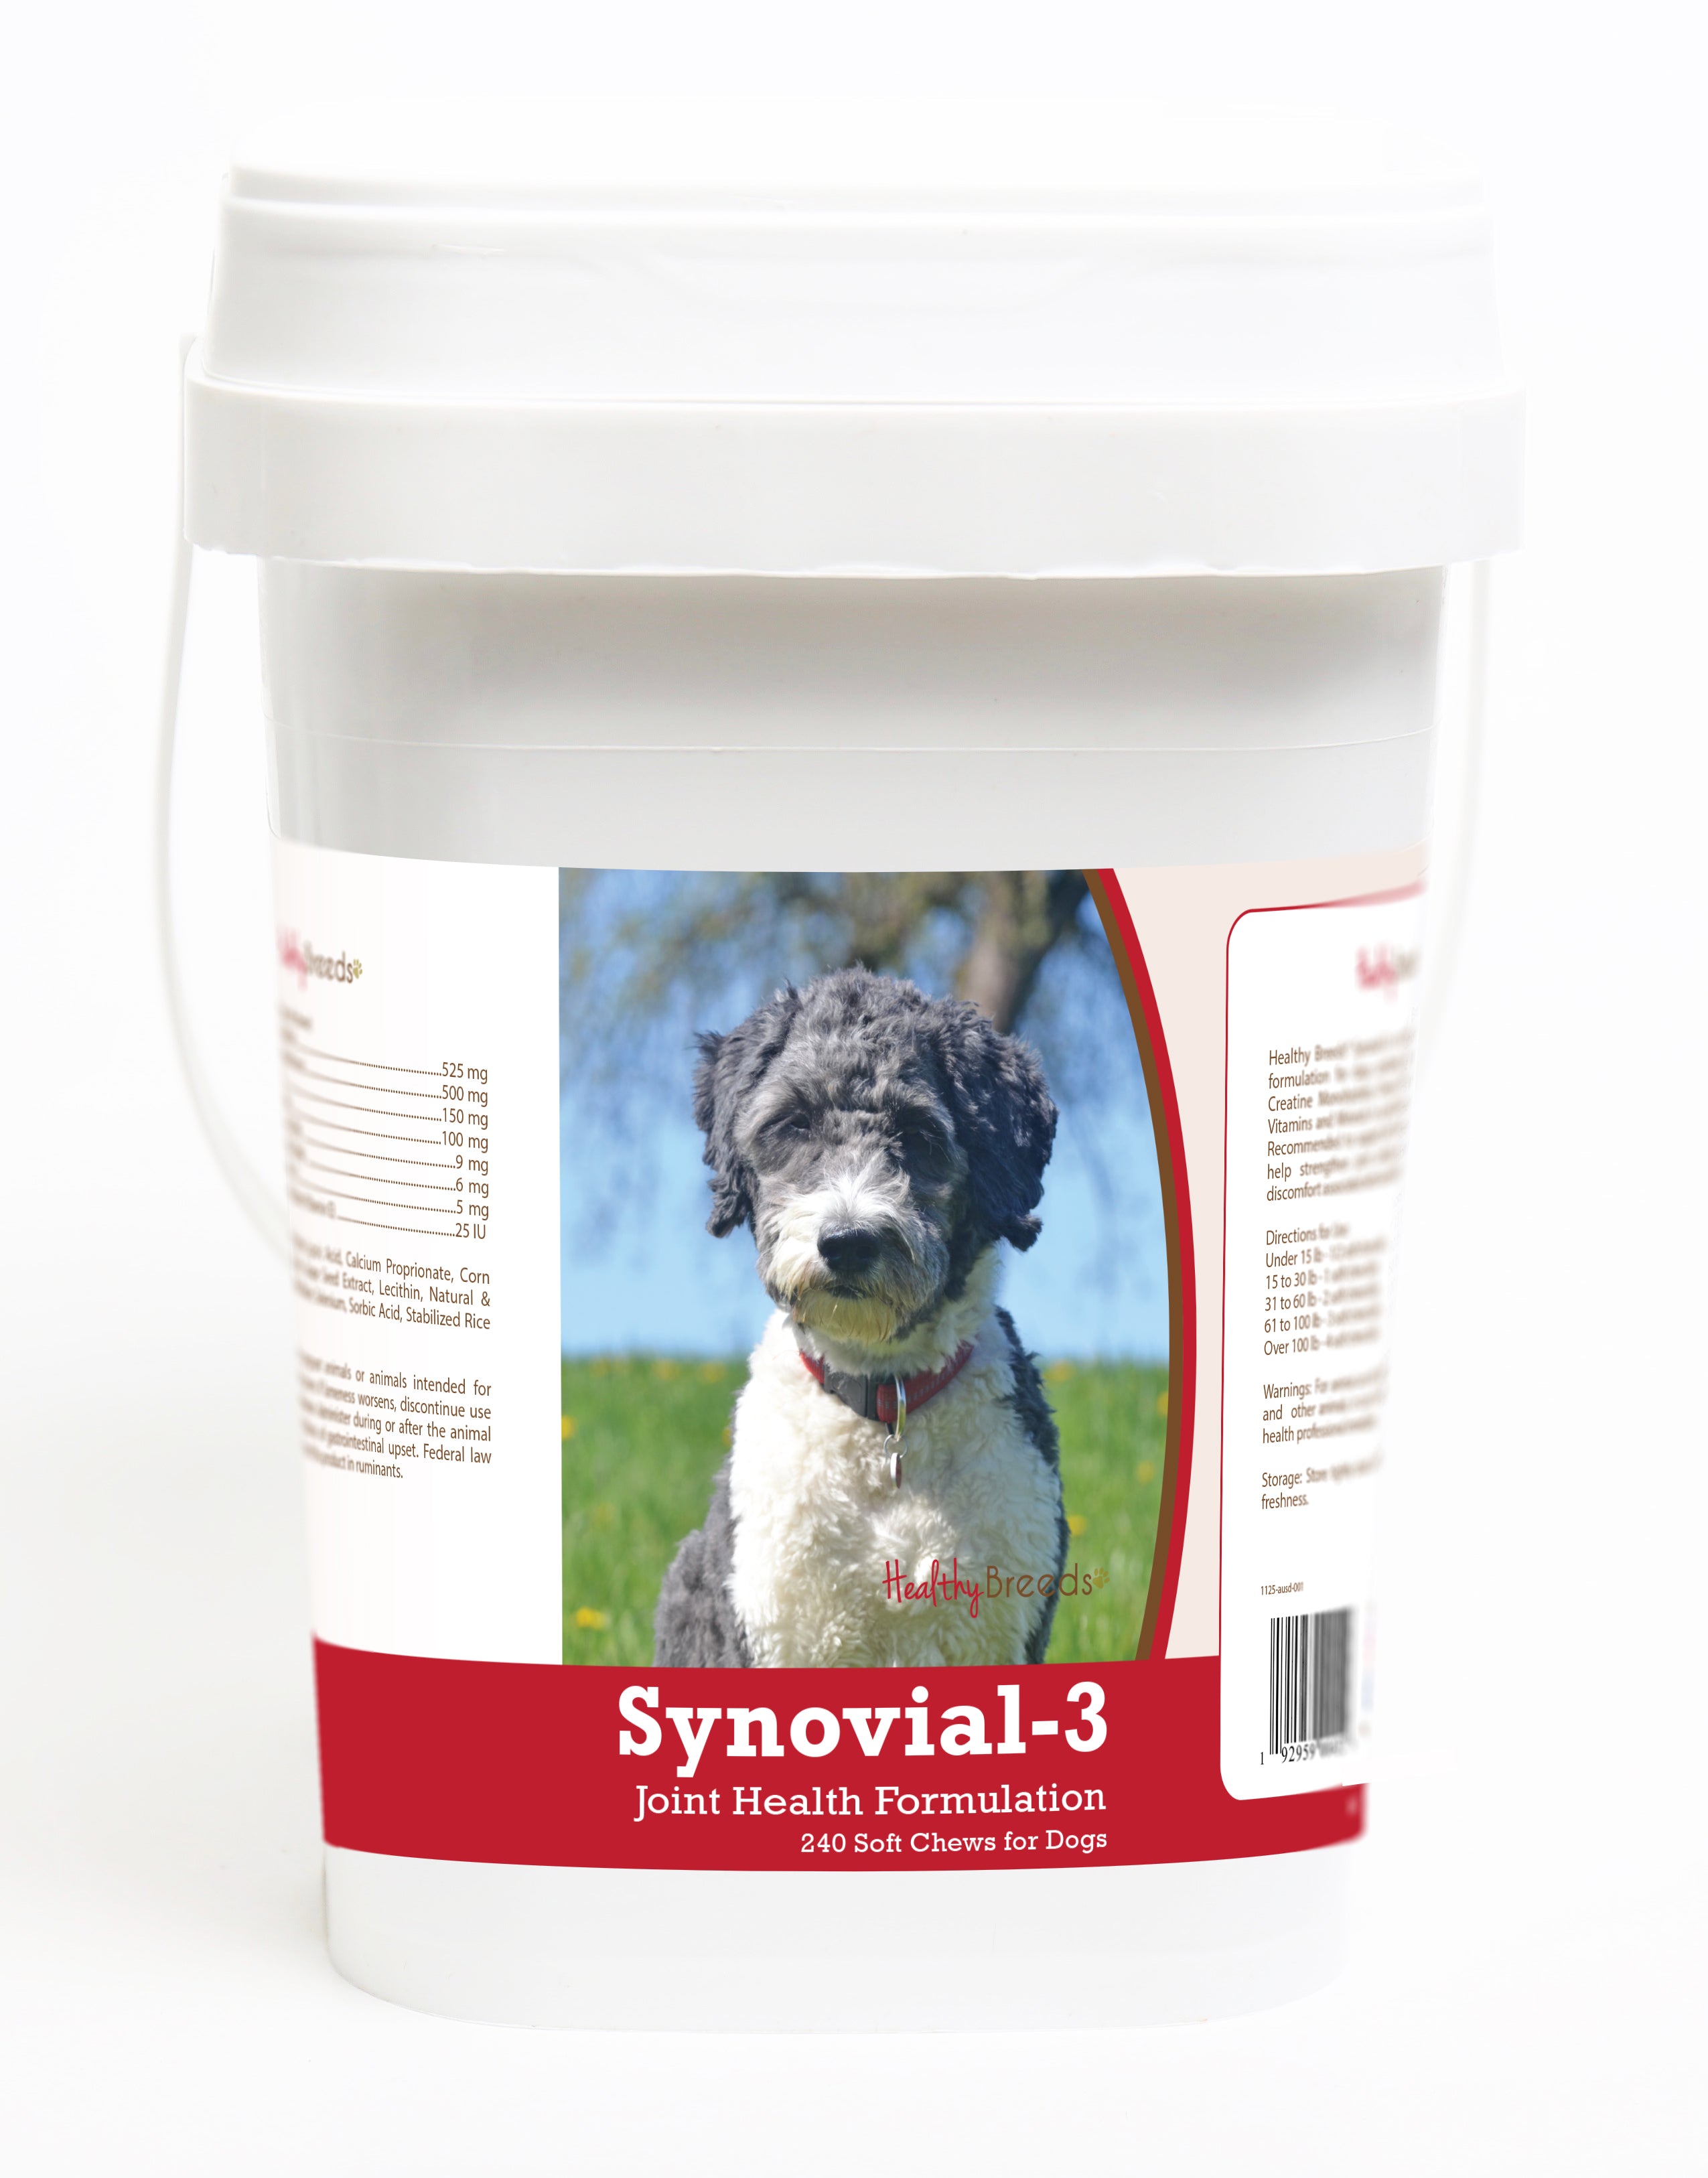 Aussiedoodle Synovial-3 Joint Health Formulation Soft Chews 240 Count